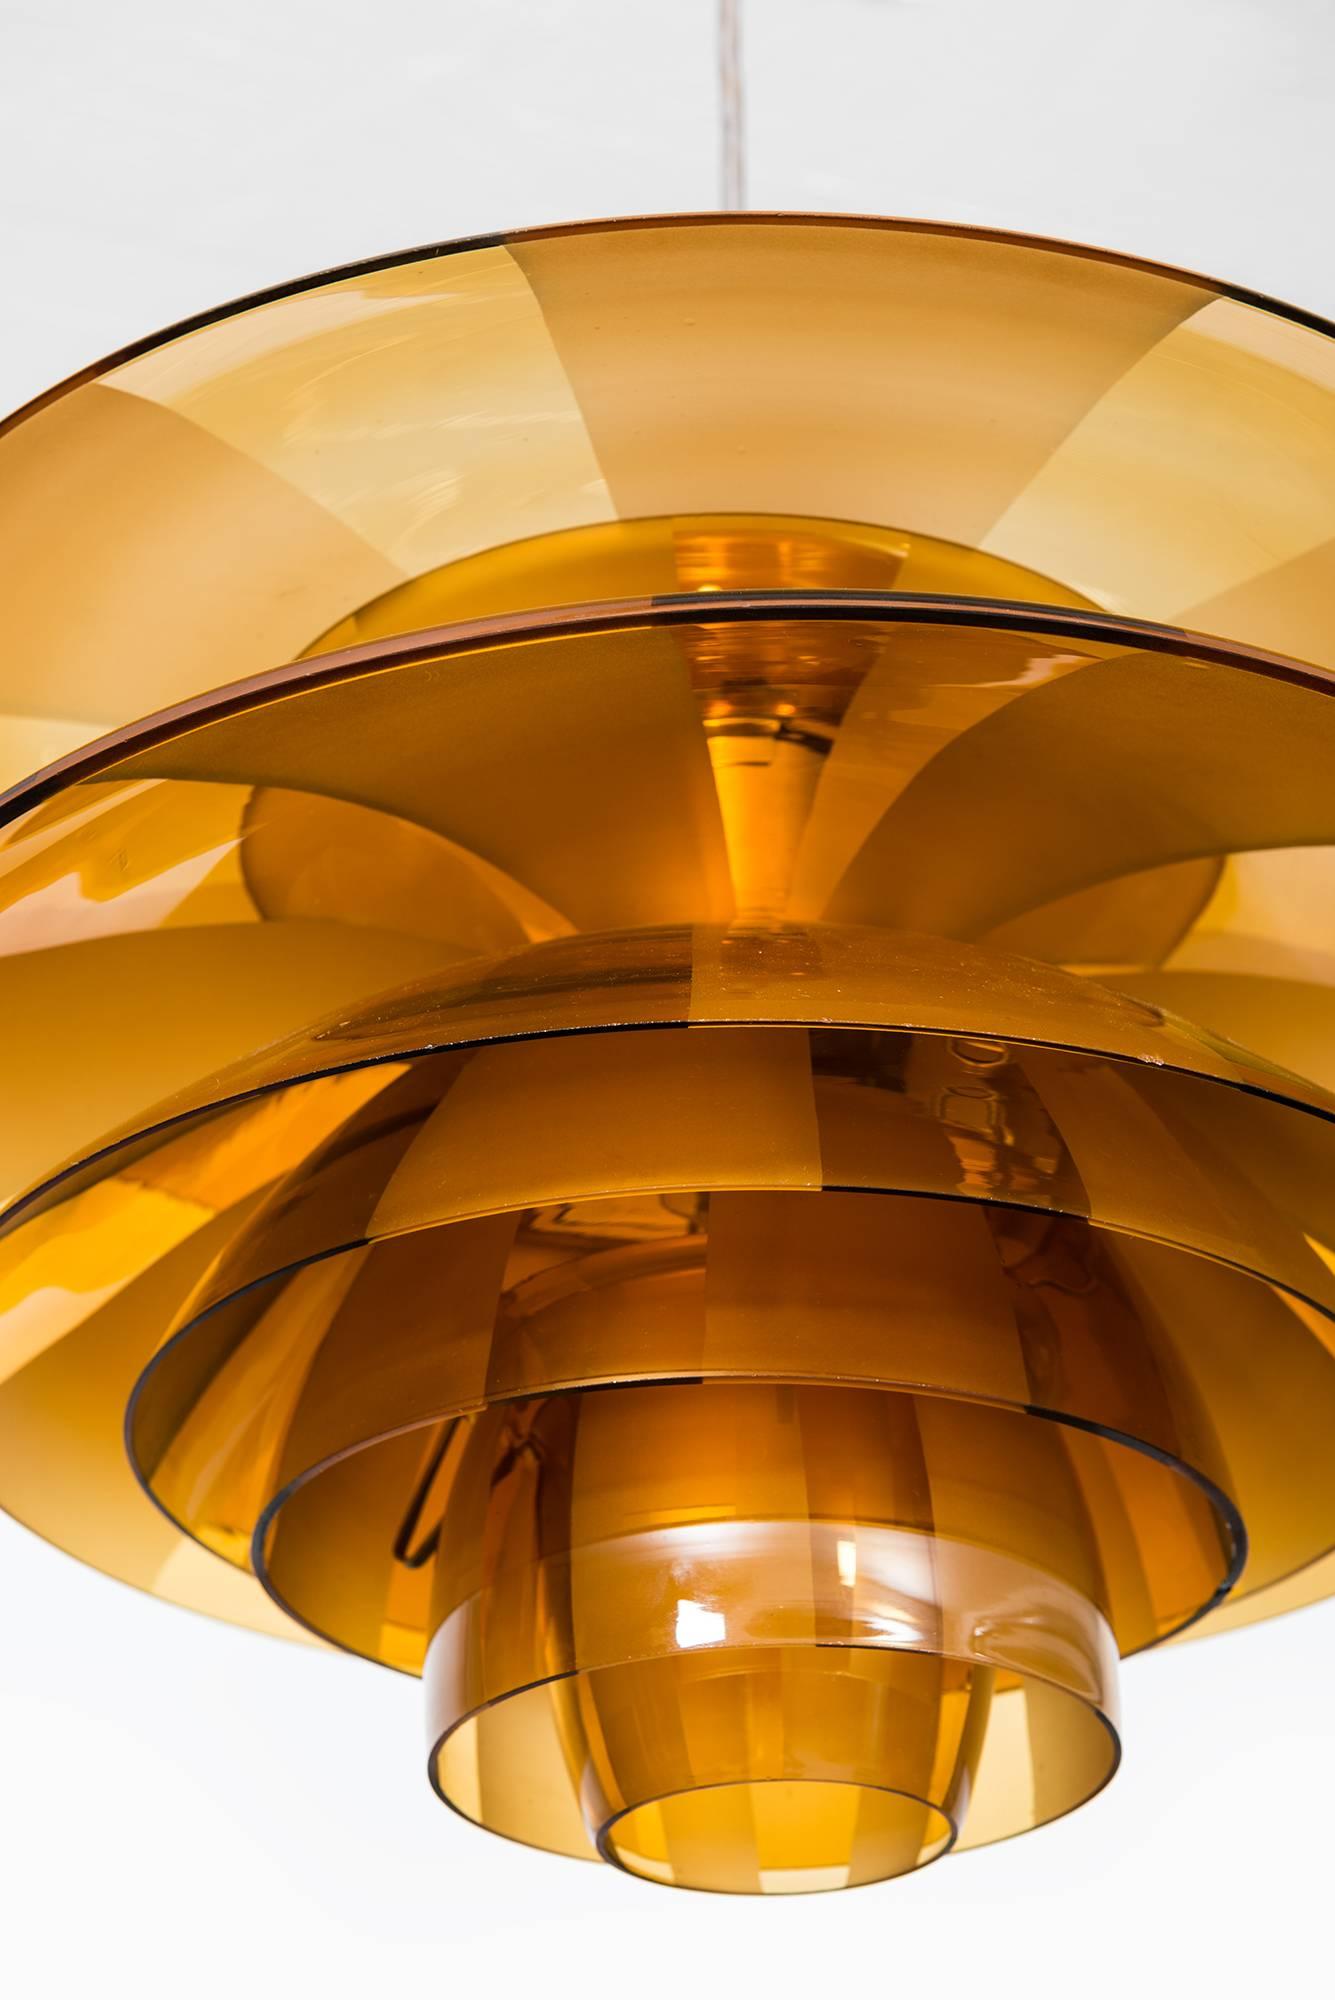 Very rare ceiling lamp model PH-Septima 5 designed by Poul Henningsen. Produced by Louis Poulsen in Denmark.